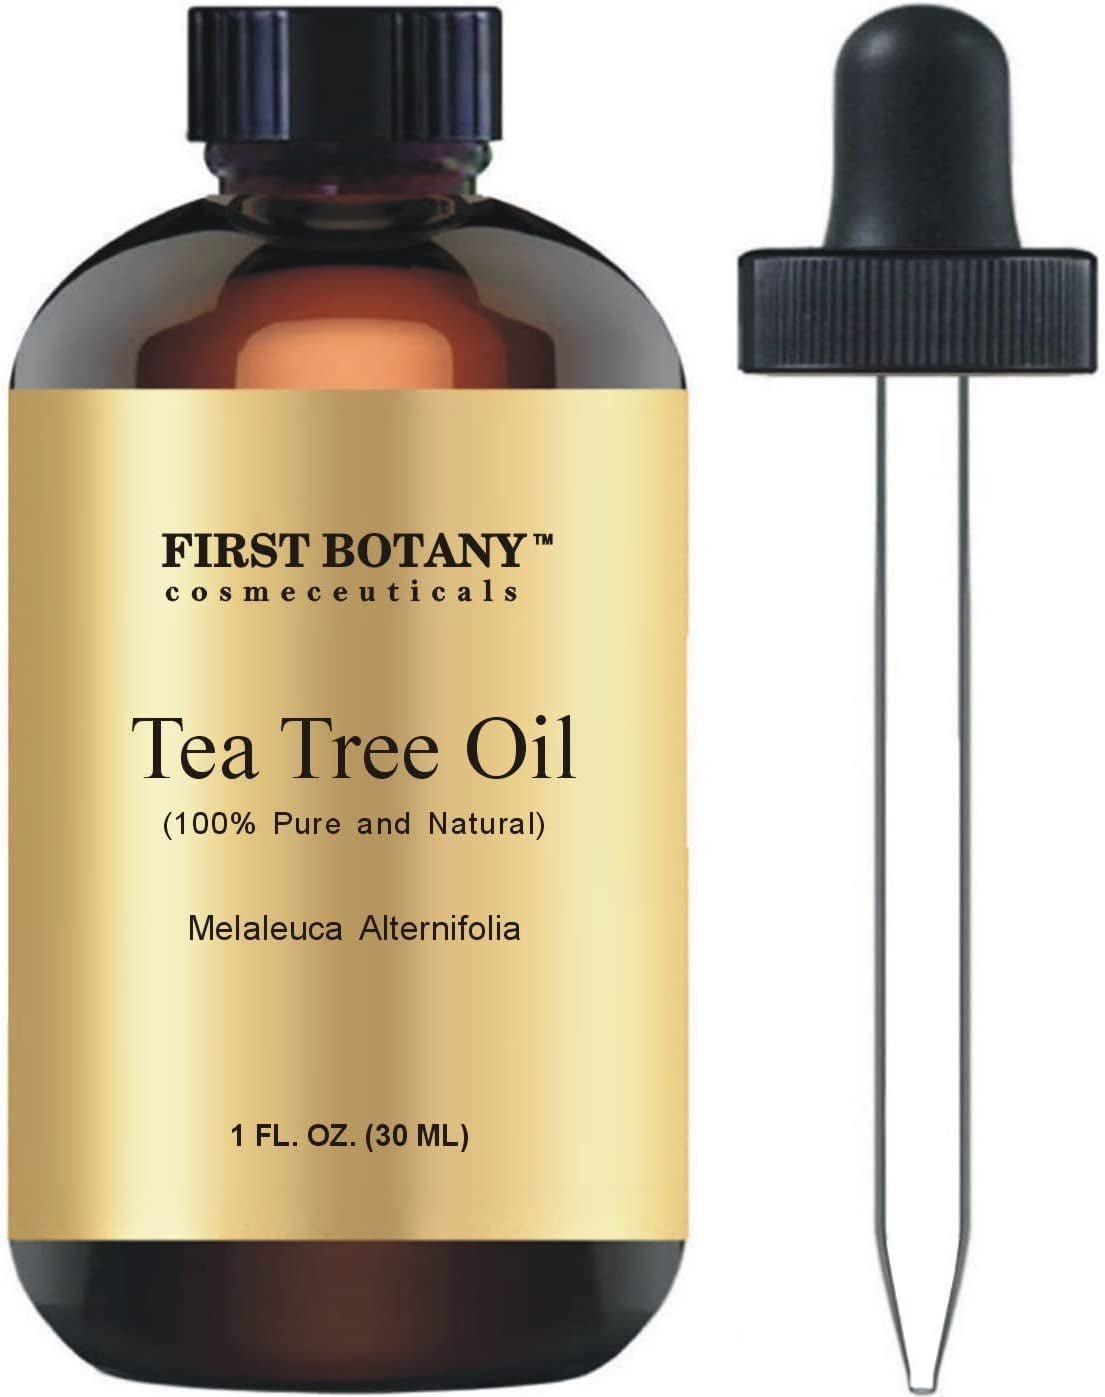 100% Pure Australian Tea Tree Essential Oil with High Conc. of Terpinen - a Known Solution to Help in Fighting Acne, Toenail Issues, Dandruff. (1 Fl Oz)